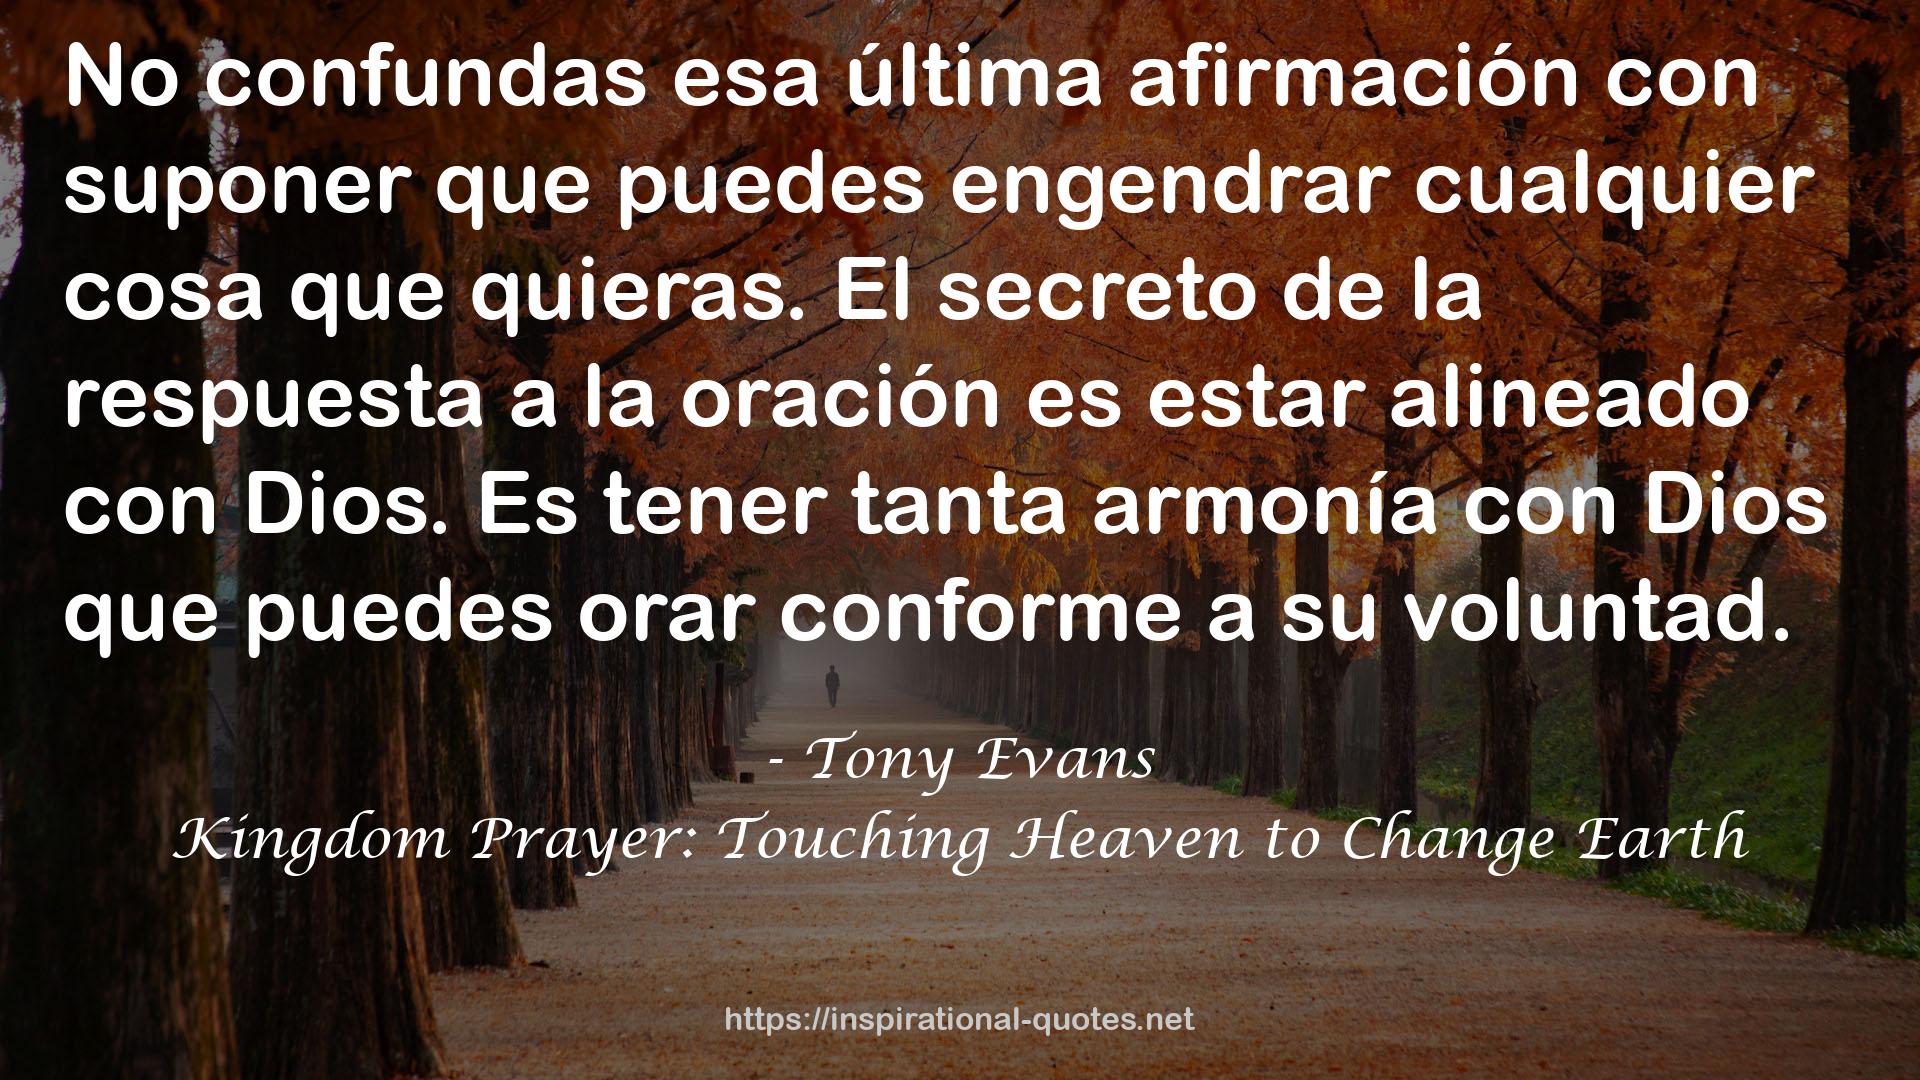 Kingdom Prayer: Touching Heaven to Change Earth QUOTES